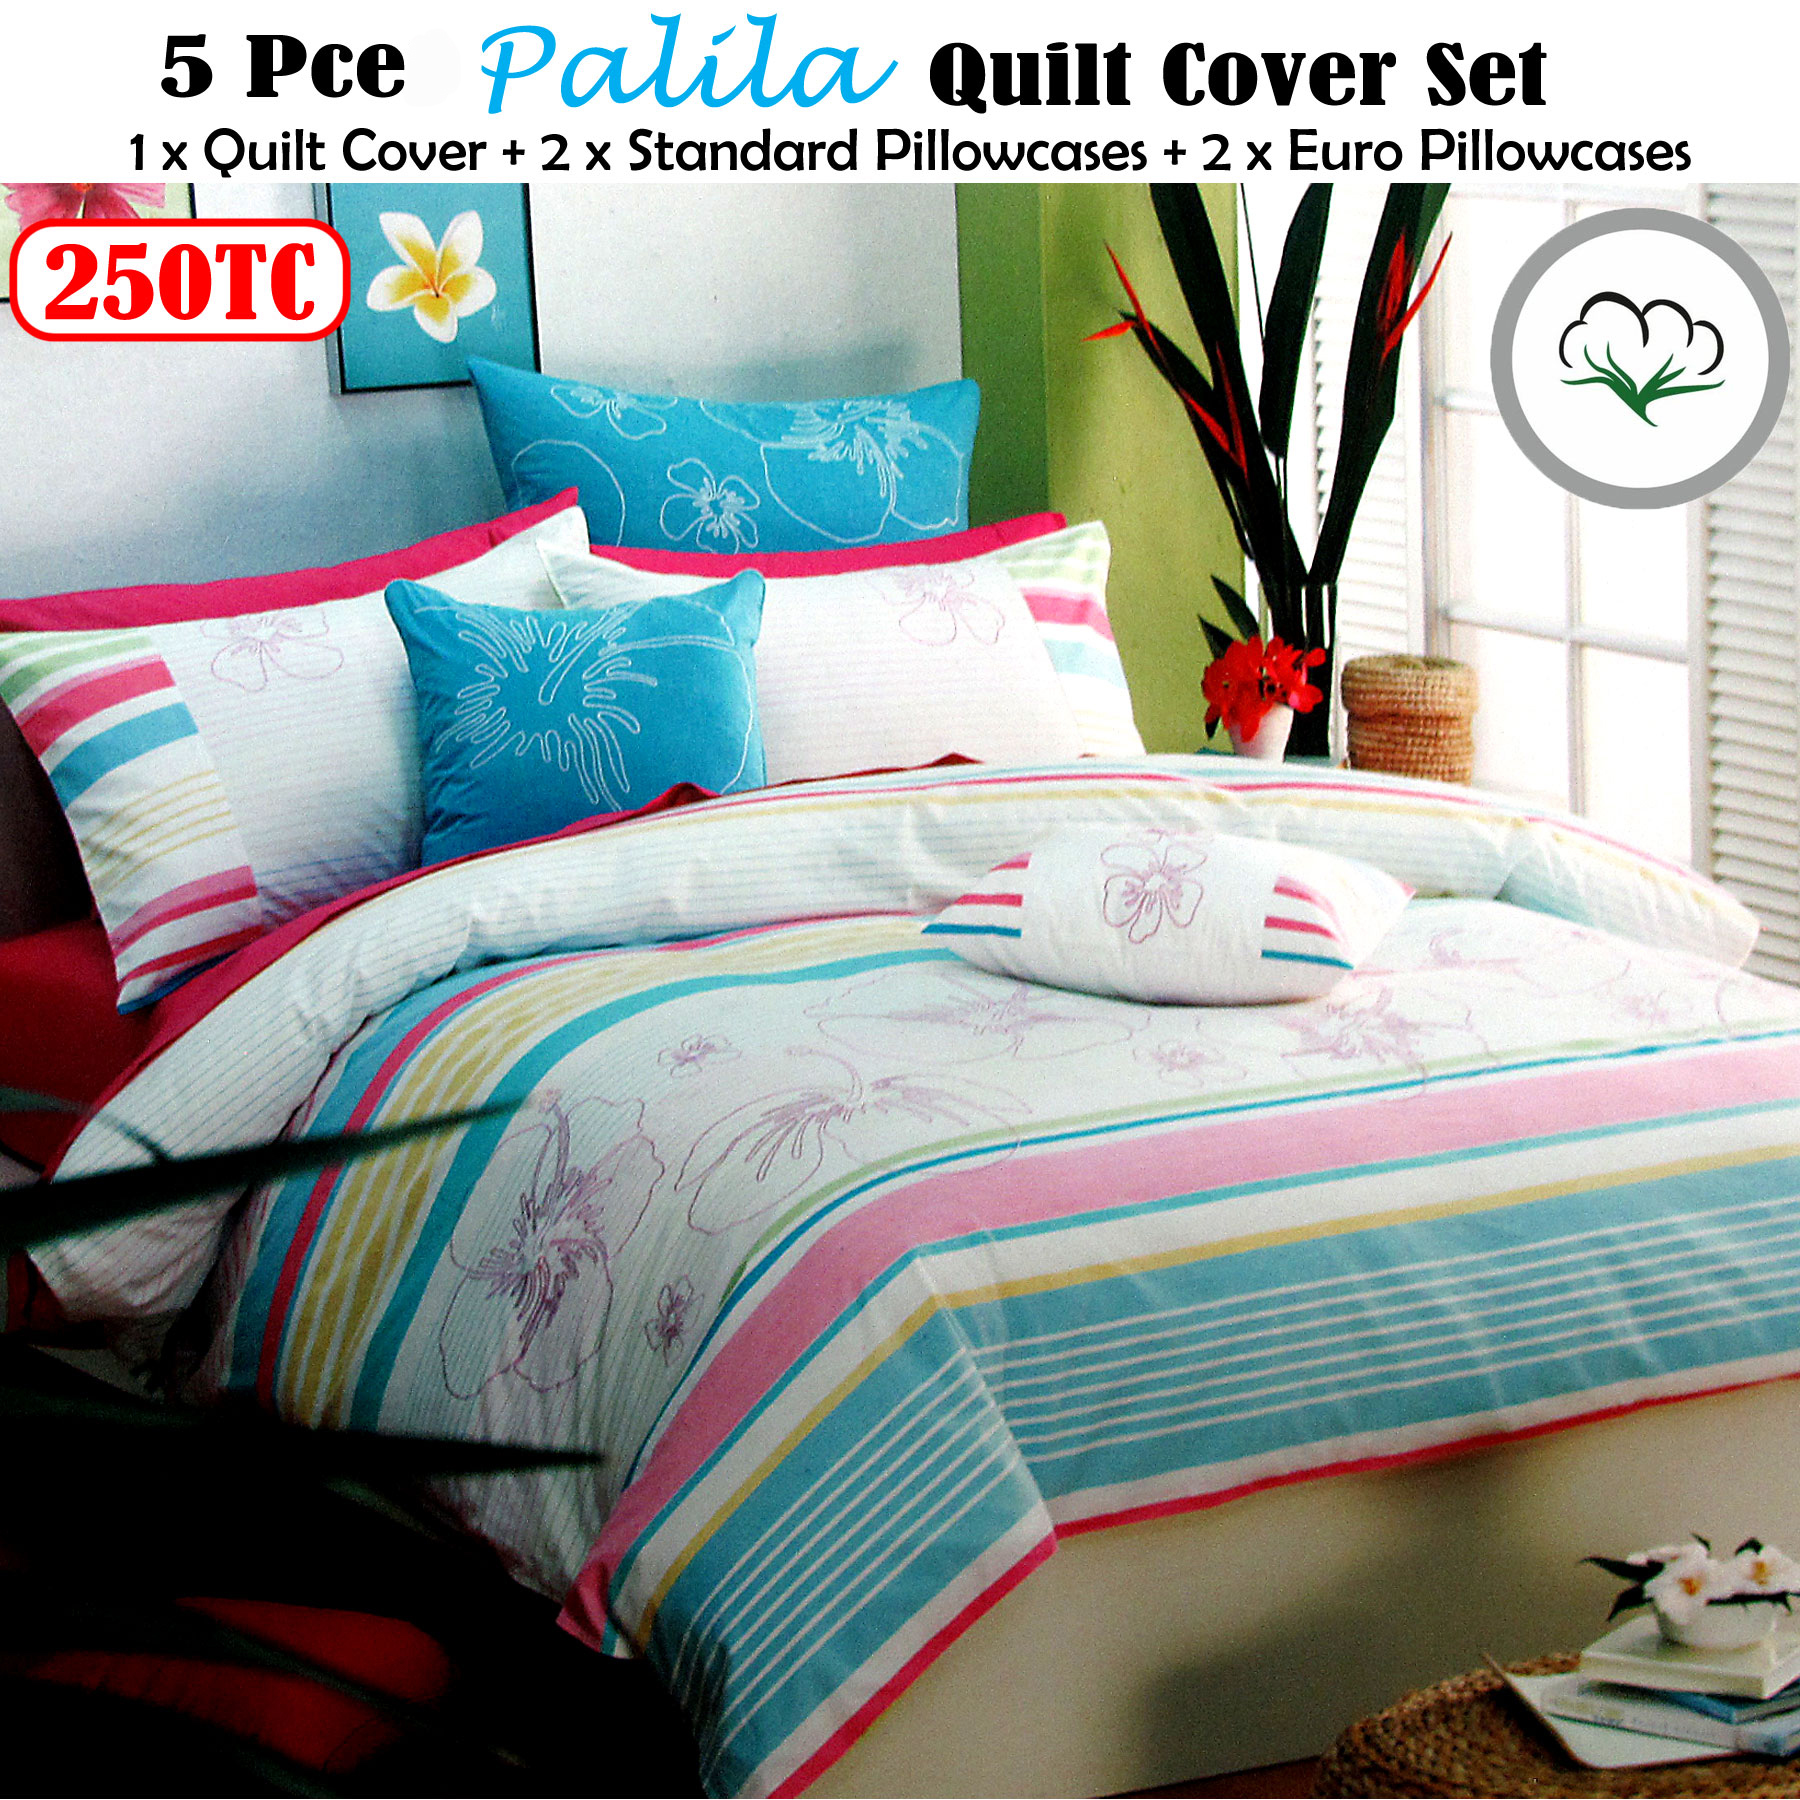 5 Pce 250tc Yarn Dyed Palila Aqua Quilt Cover Set 2 Eurocases Queen Ebay